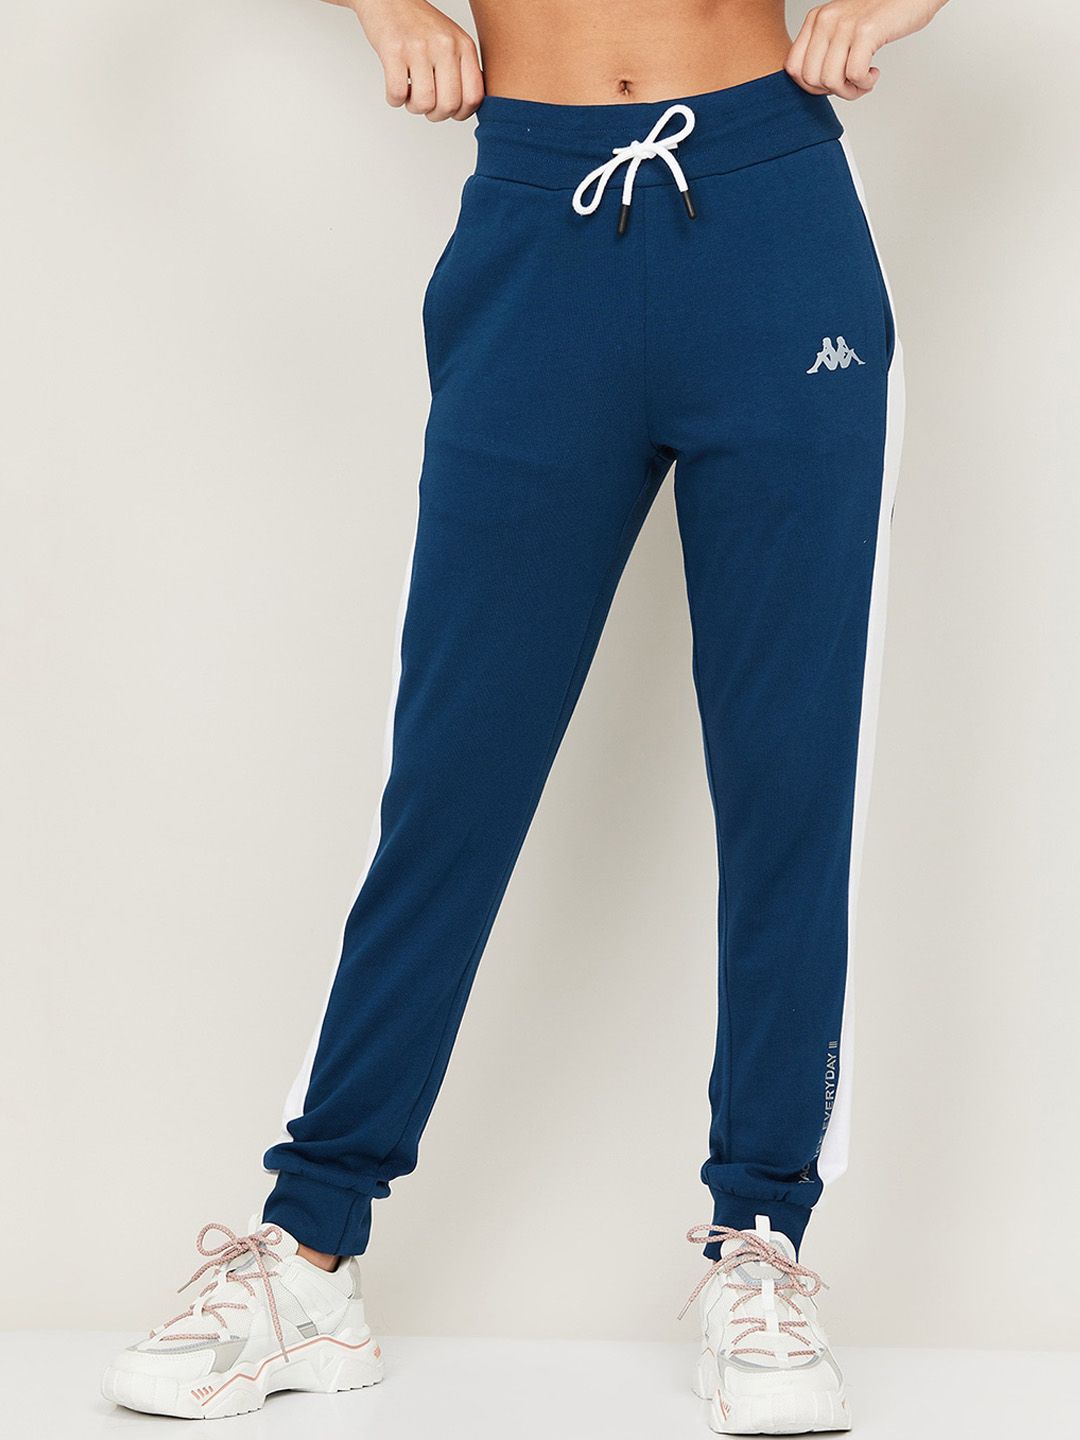 Kappa Women Blue Regular Fit Solid Joggers Price in India